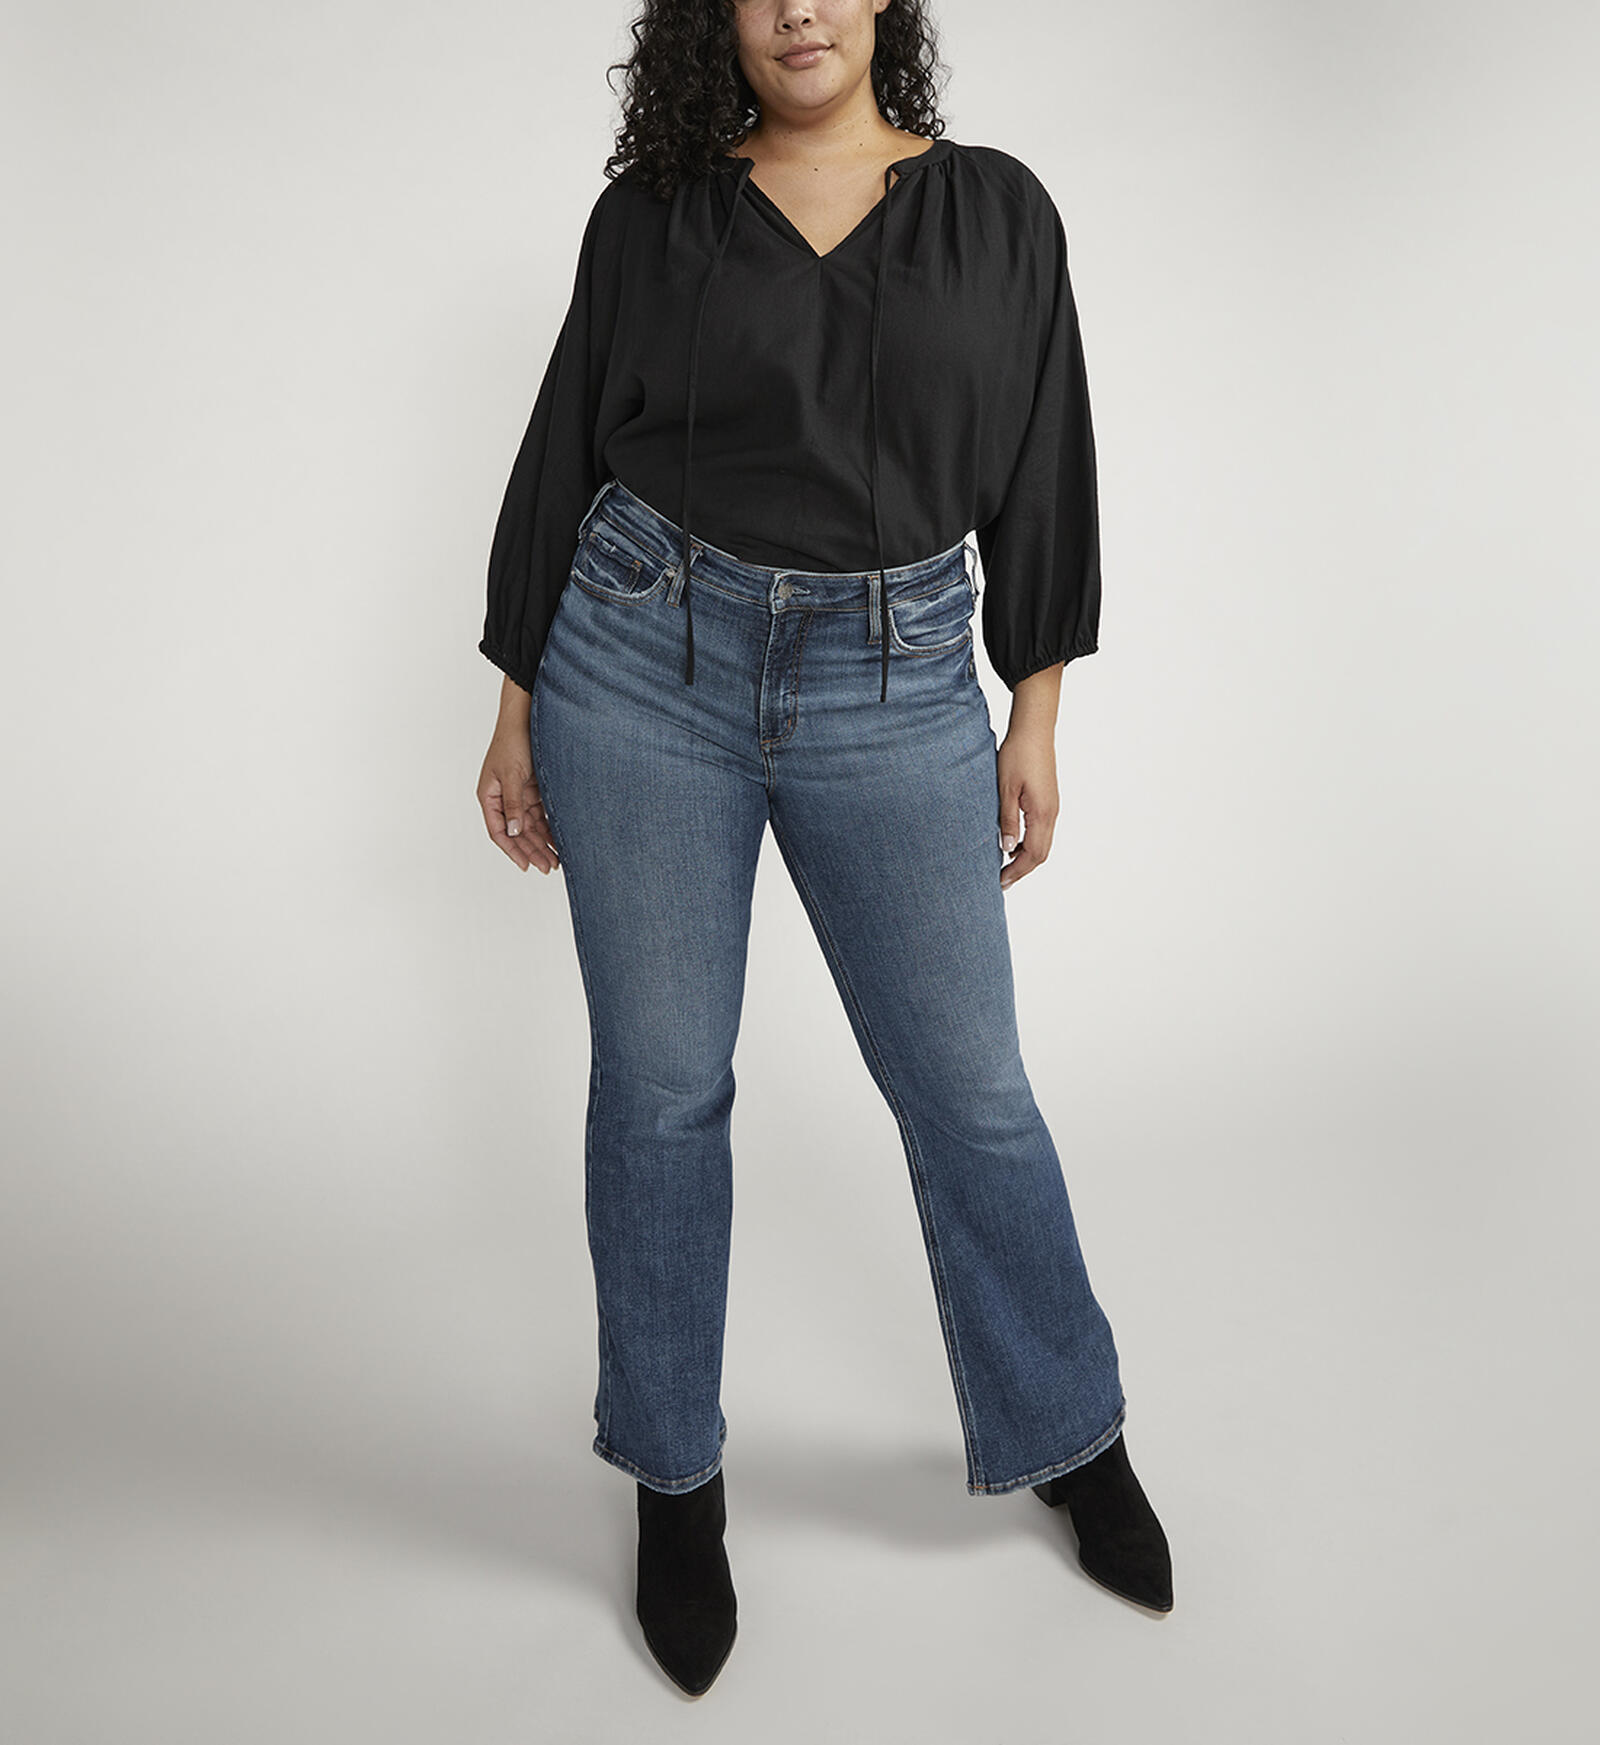 Buy Most Wanted Mid Rise Flare Jeans Plus Size for CAD 102.00